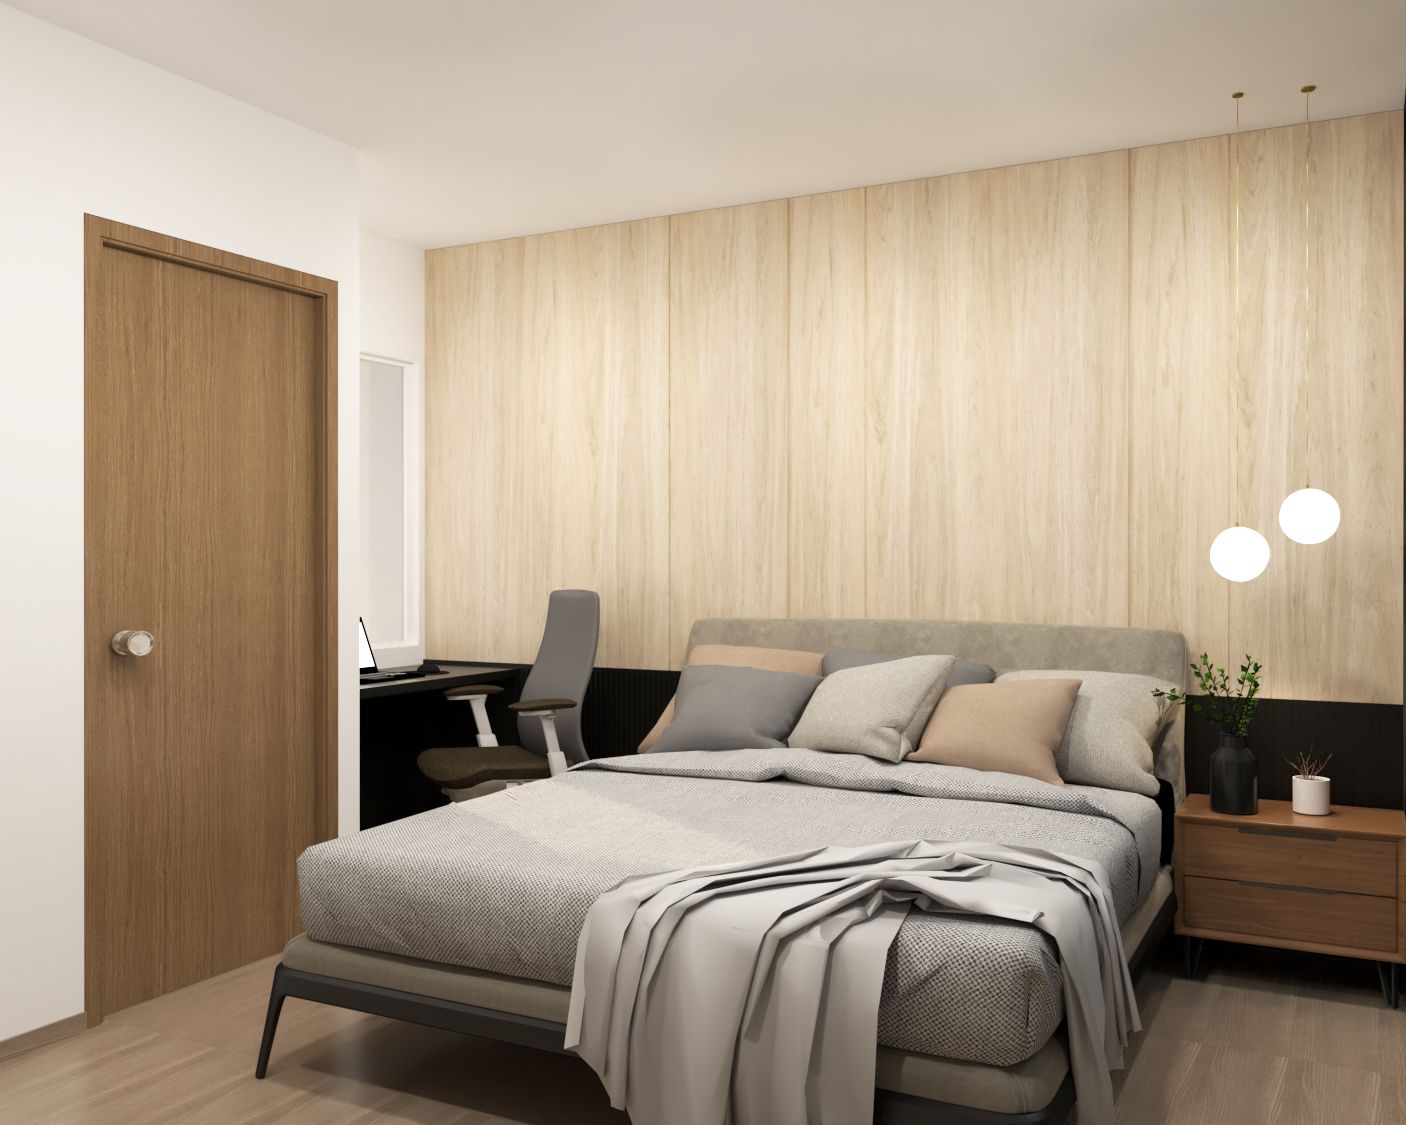 Contemporary Master Bedroom Design With Oak Wooden Panel